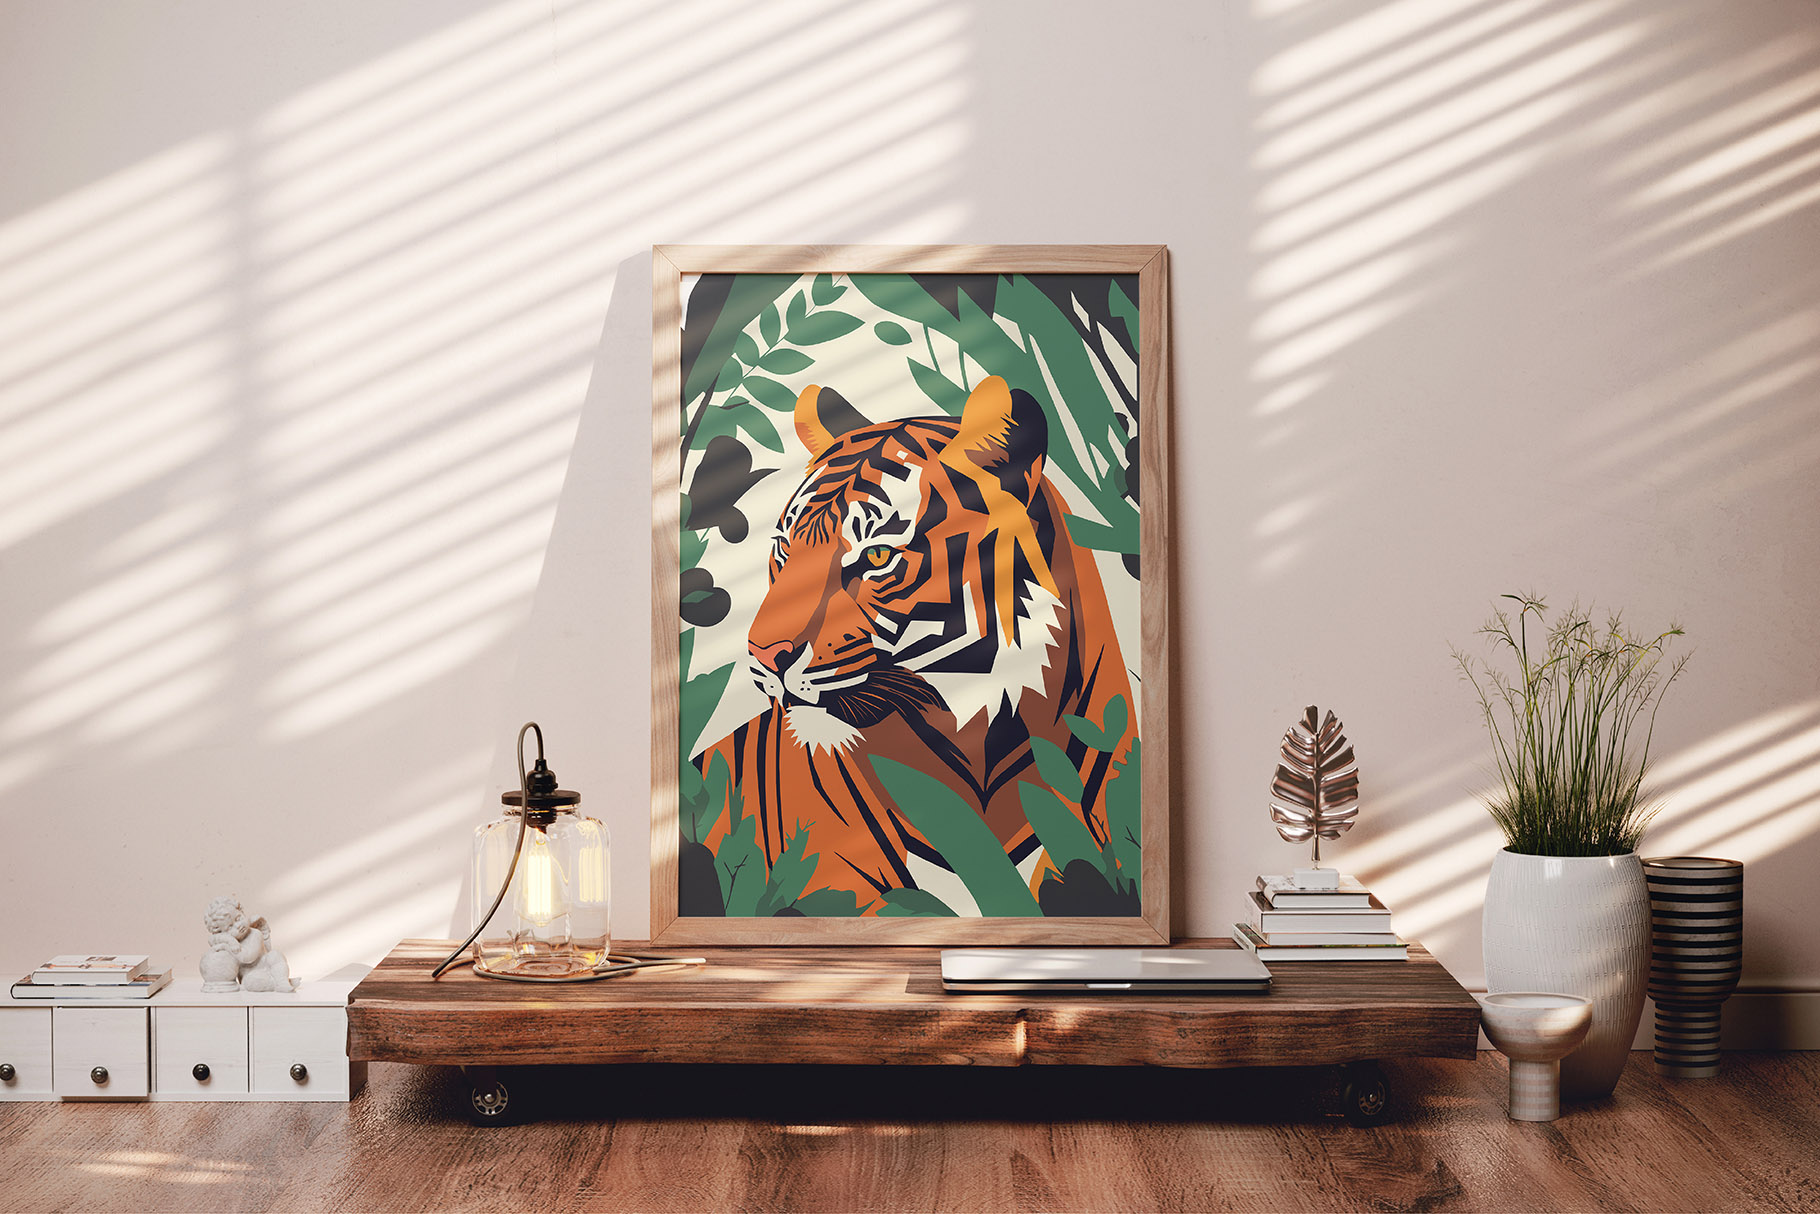 Picture of a tiger in a frame on a table.